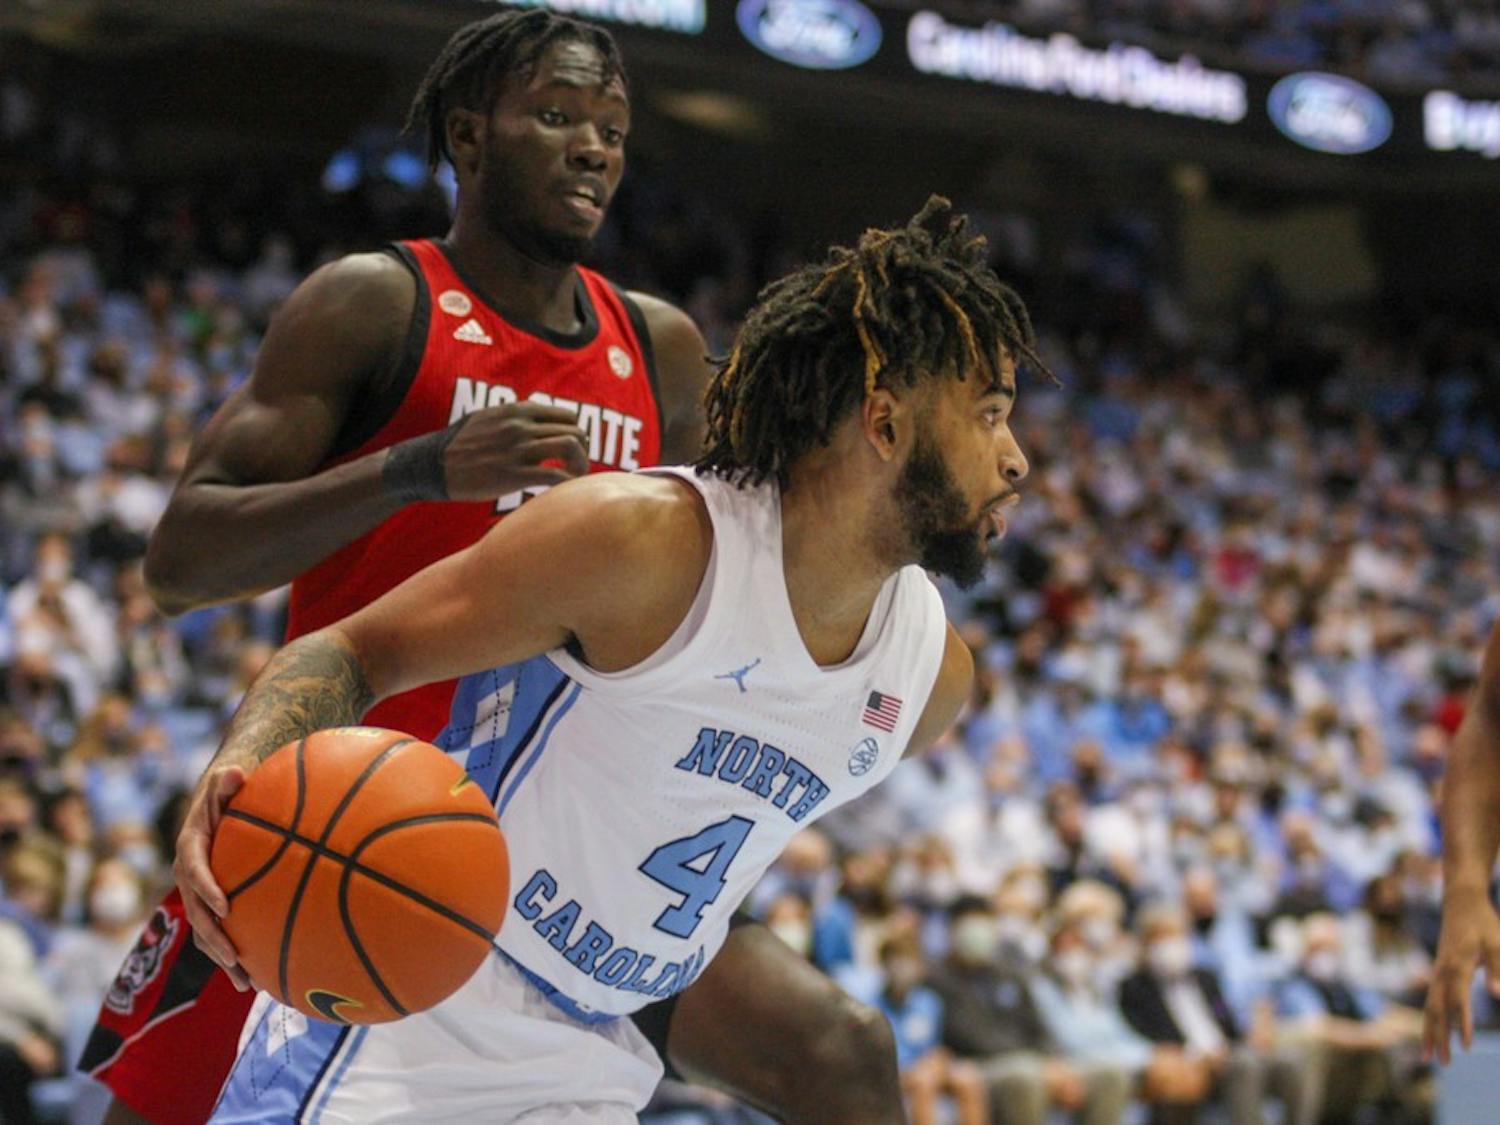 UNC sophomore guard RJ Davis (4) runs with the ball at the game against North Carolina State University on Saturday Jan. 29, 2022 at the Smith Center in Chapel Hill. UNC won 100-80.